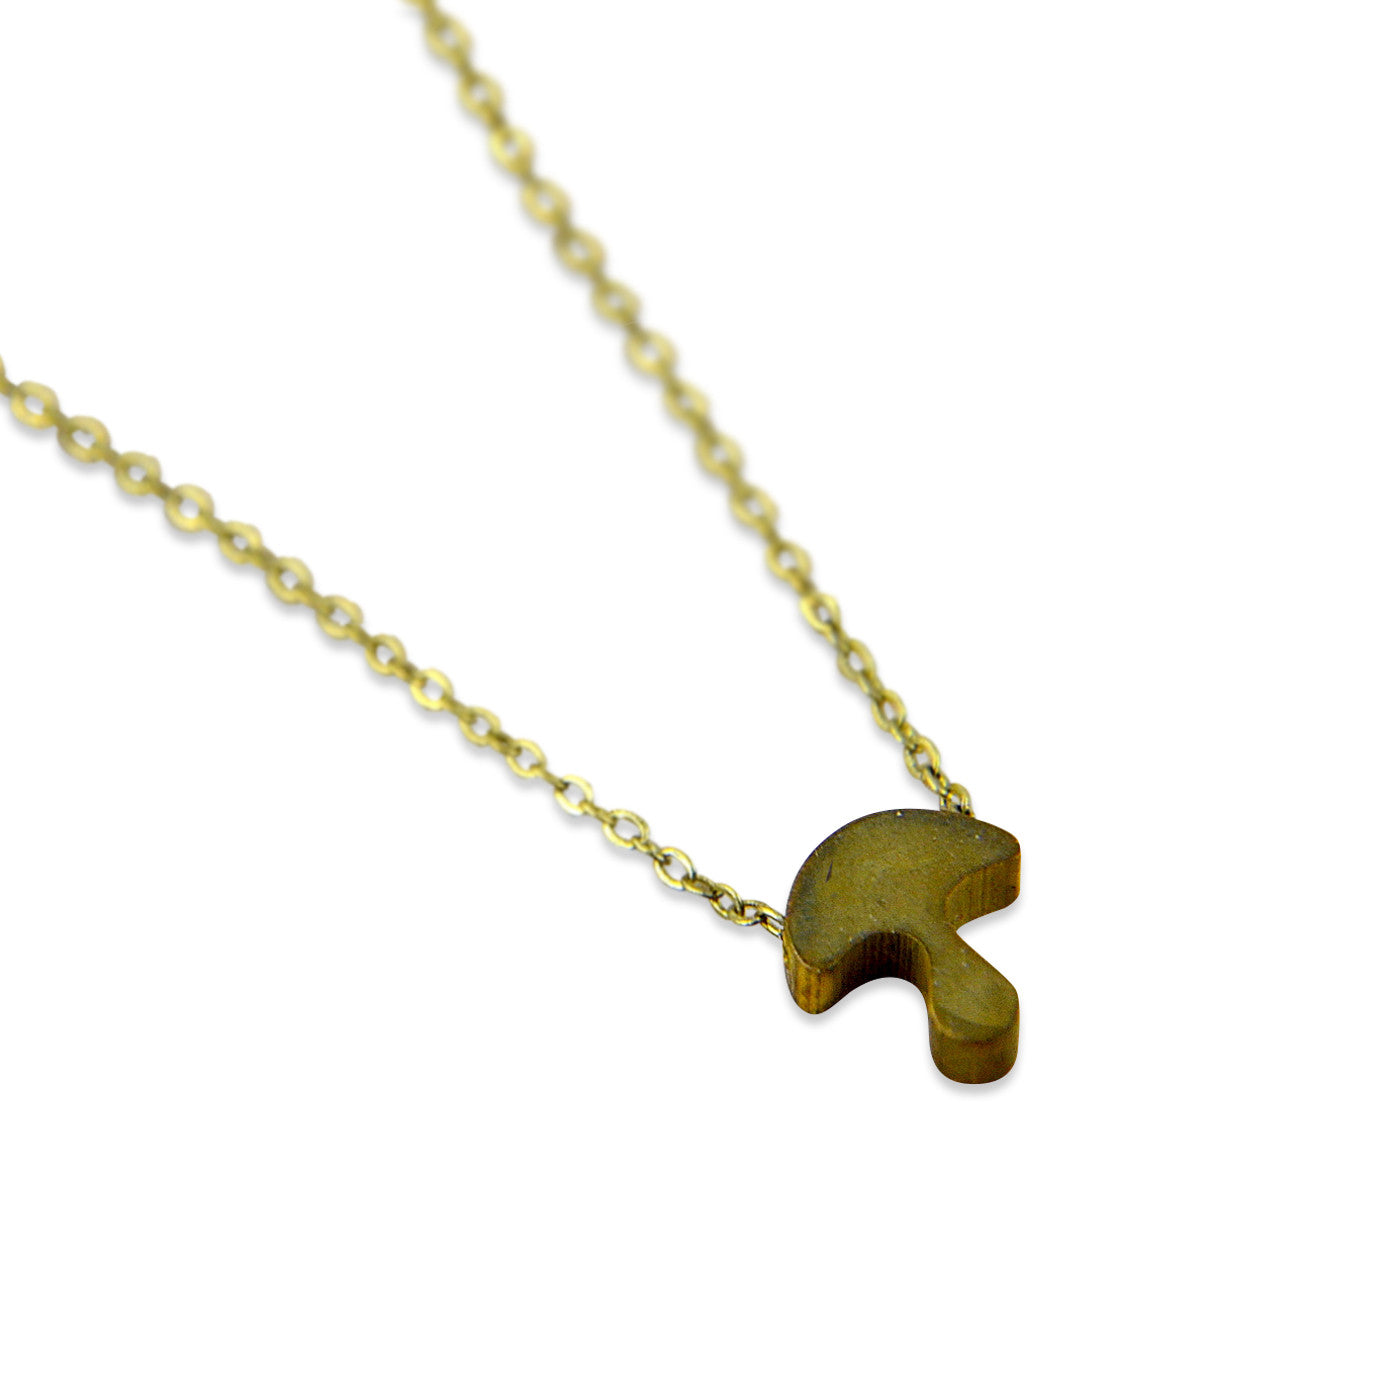 Tiny Mushroom Necklace - Gwen Delicious Jewelry Designs